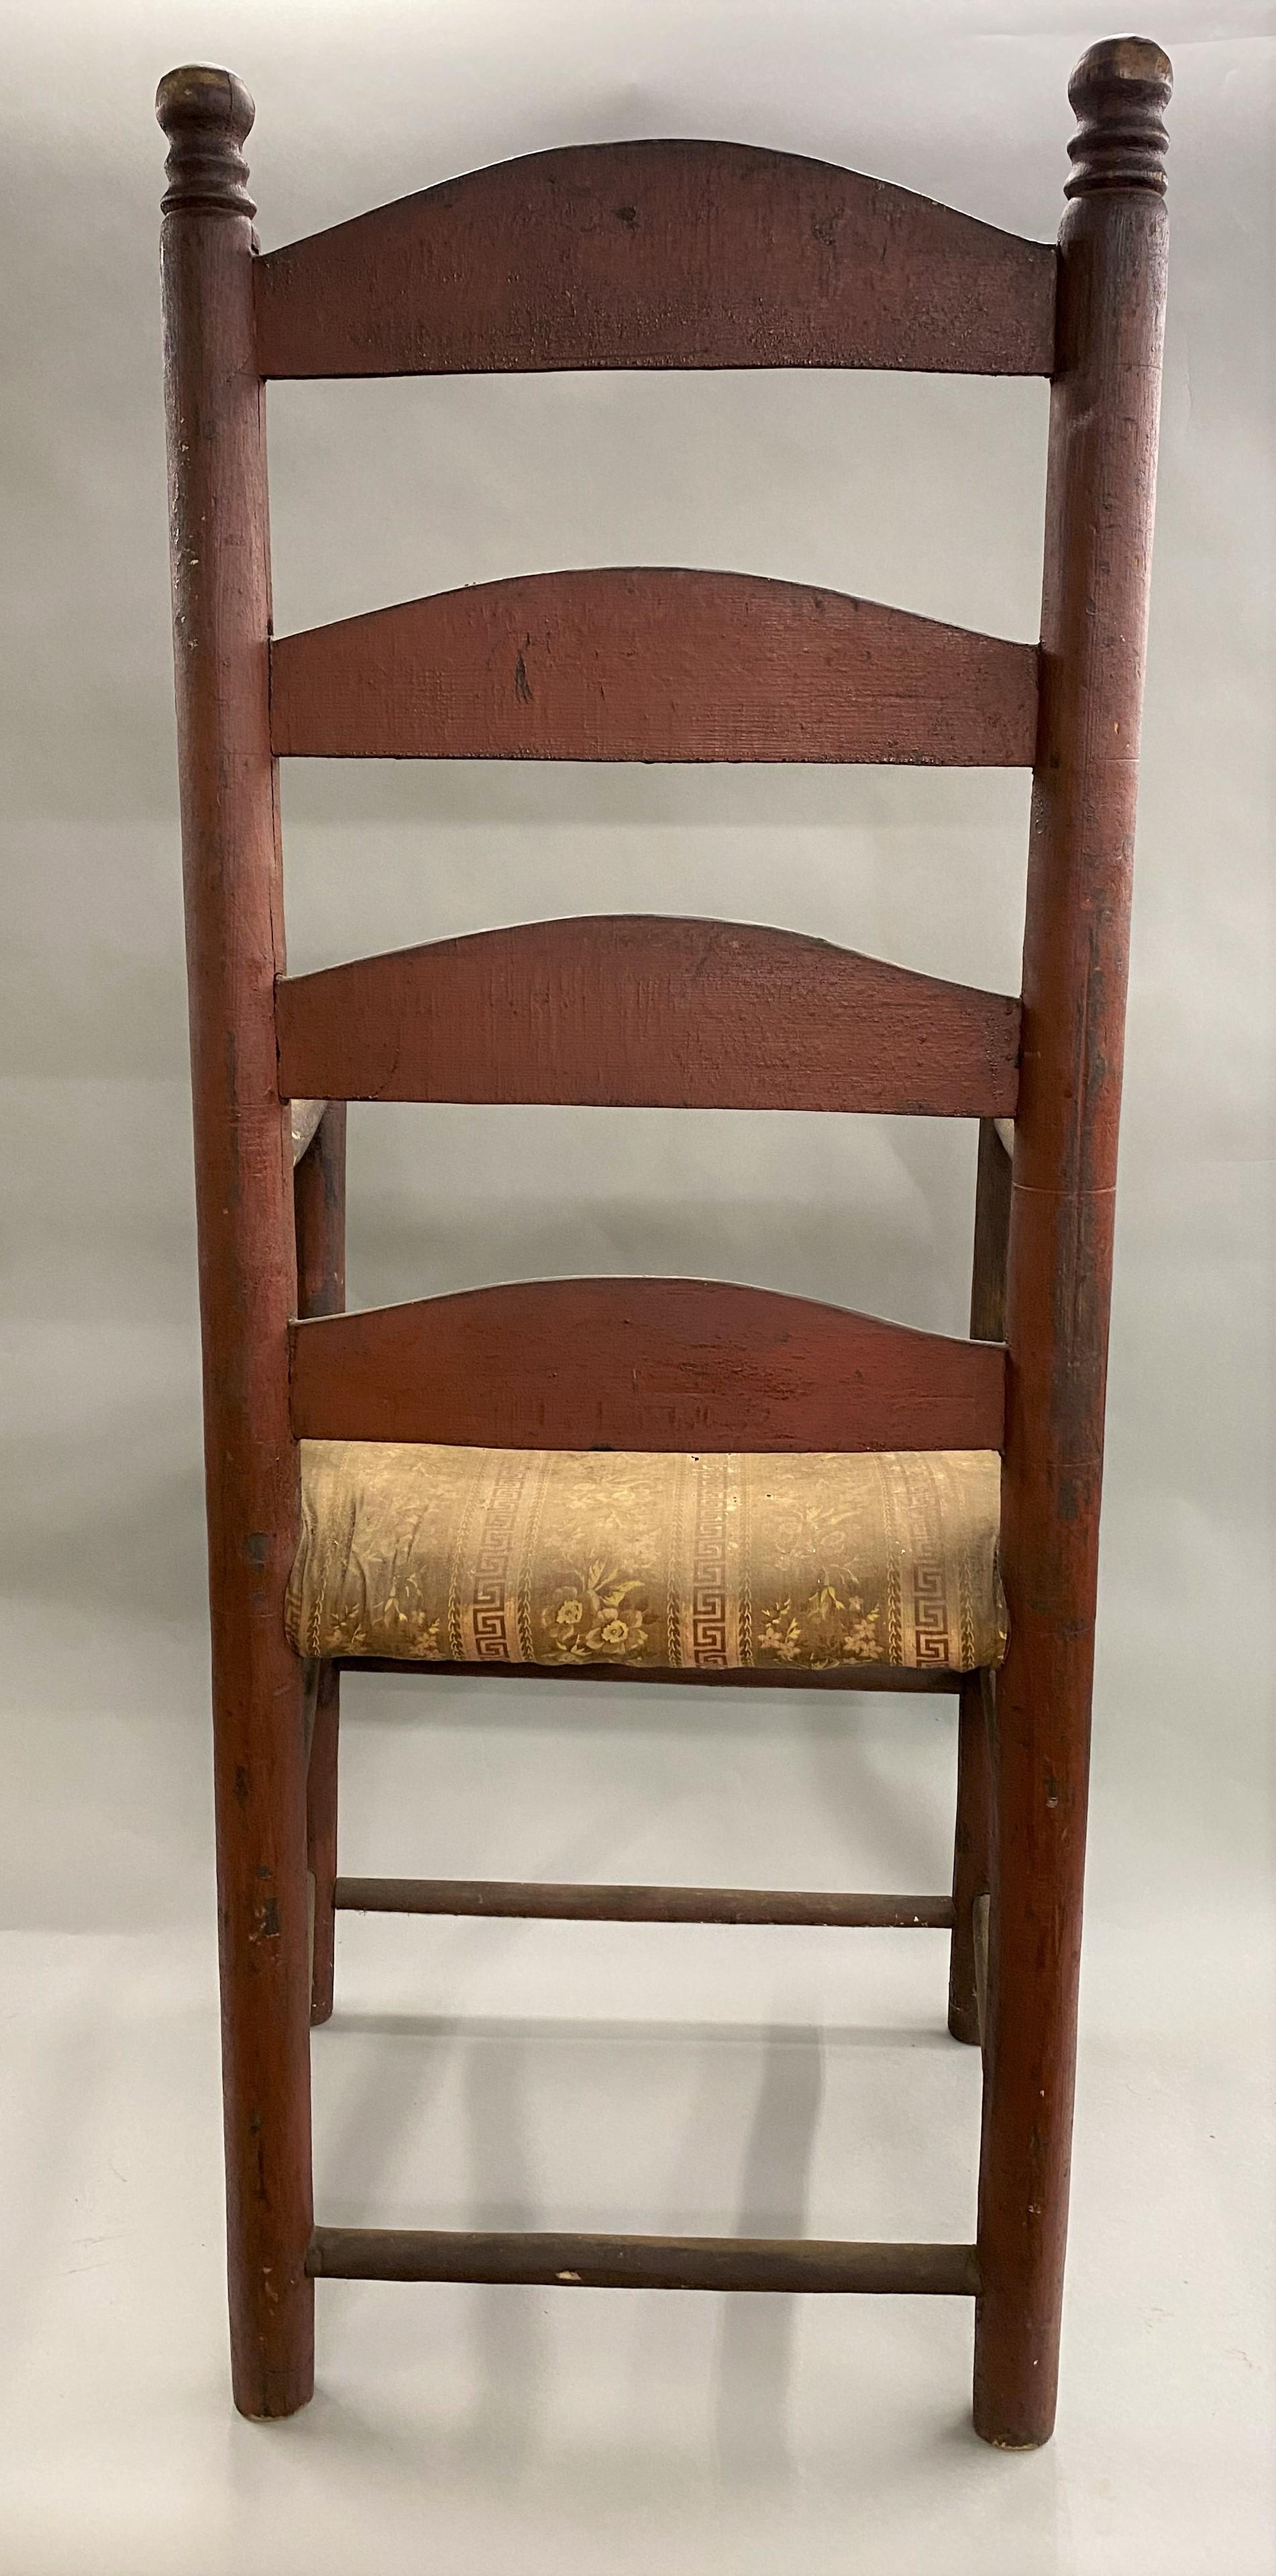 18th Century and Earlier 18th Century American Ladder Back Armchair in Old Crusty Red Paint For Sale